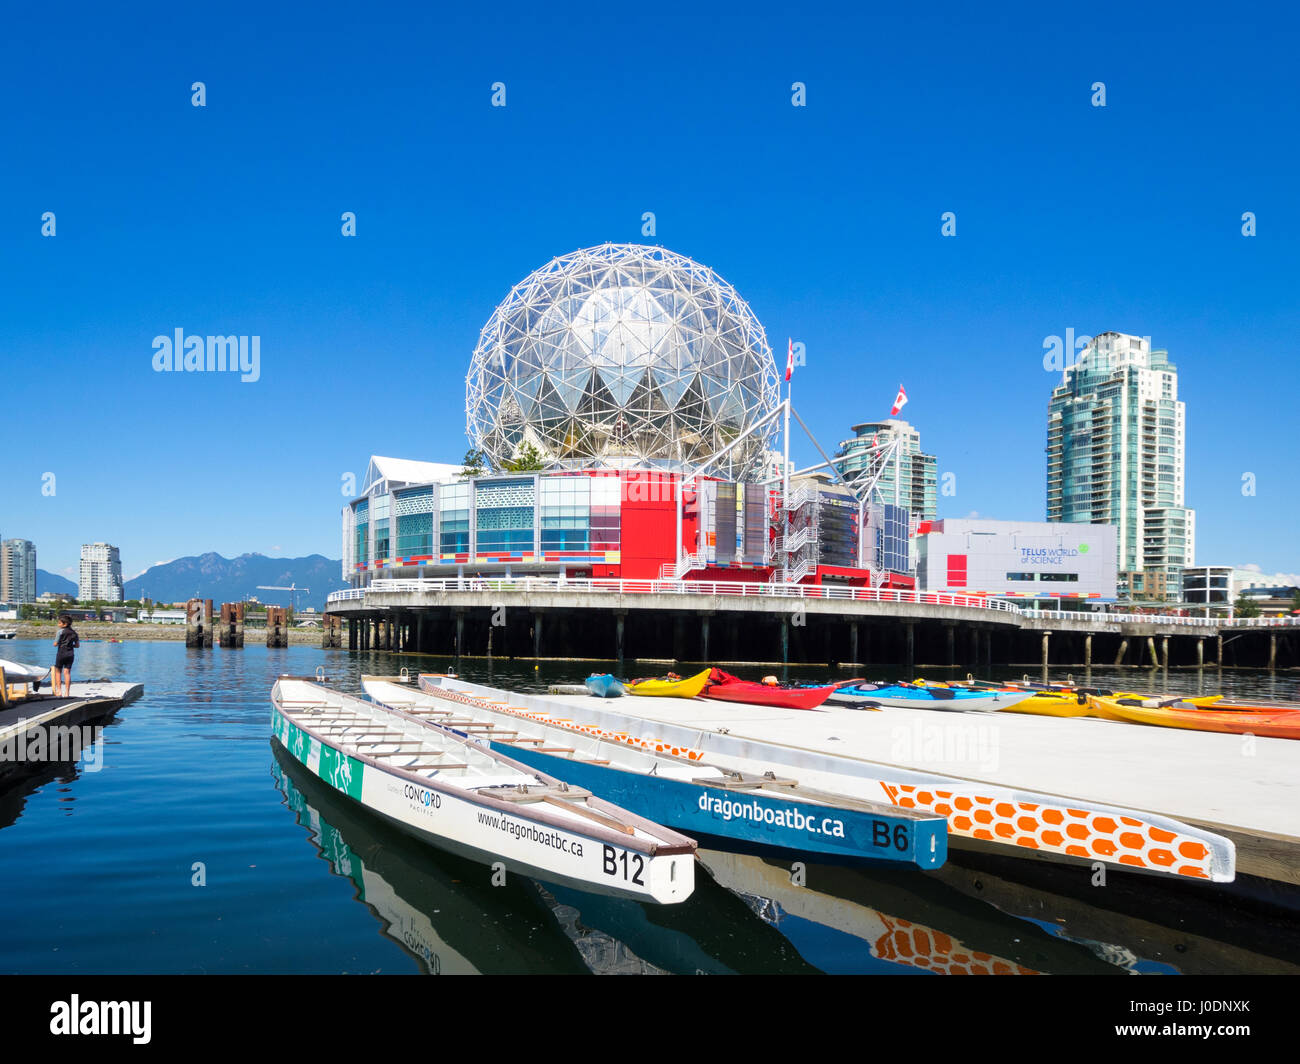 Science World at Telus World of Science (background) and the Dragon Zone Paddling Club (foreground) on False Creek in Vancouver, BC, Canada. Stock Photo